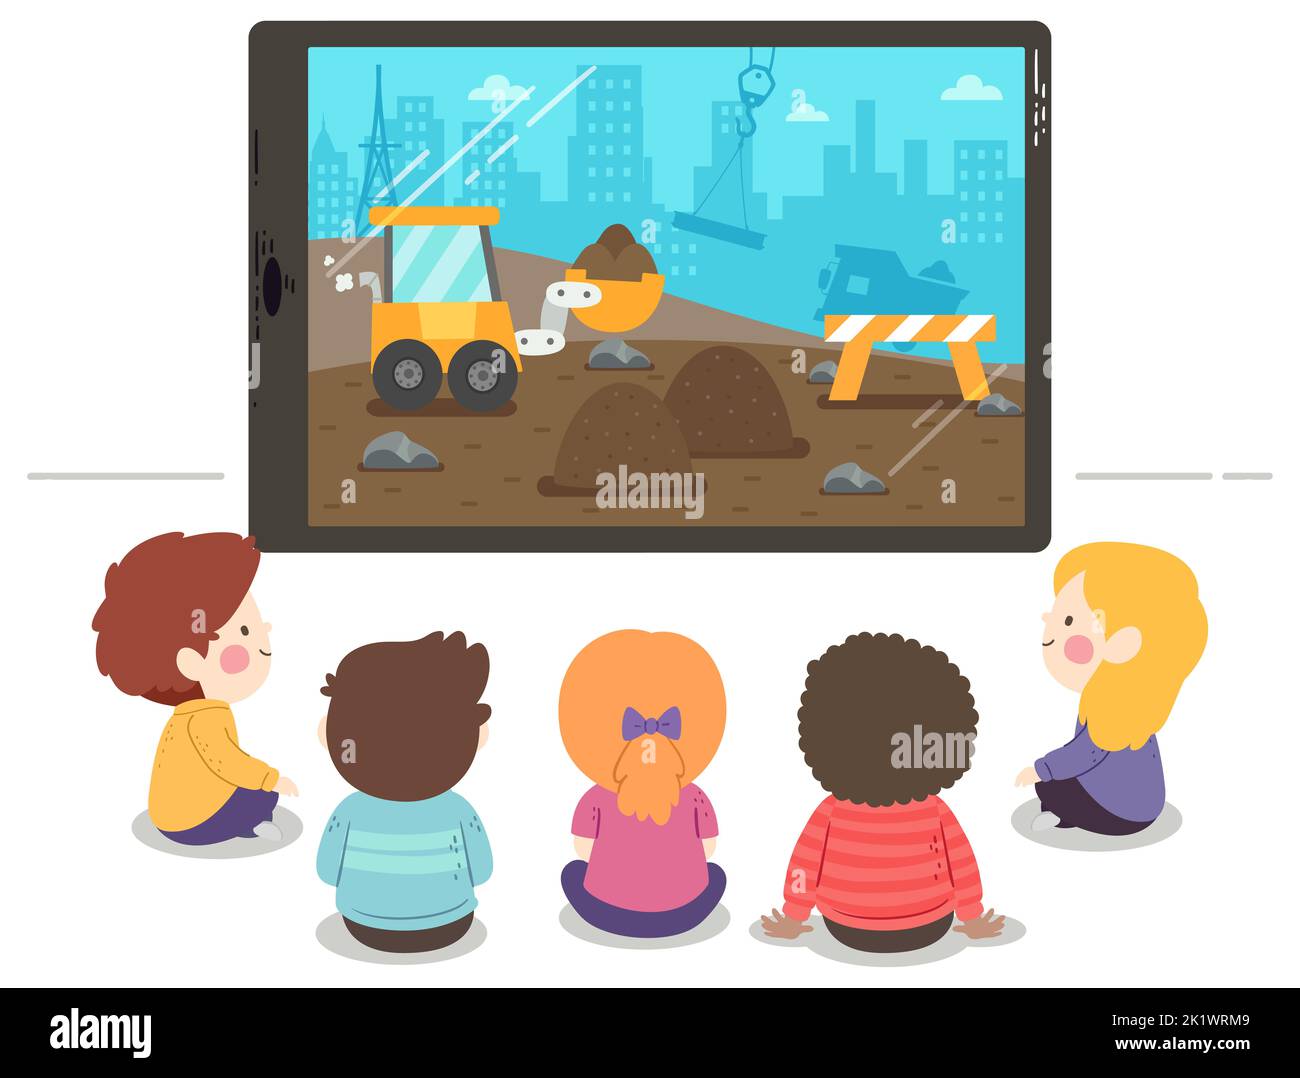 Illustration of Kids Sitting Down and Watching a Construction Story with a Lifter in a Tablet Computer Stock Photo